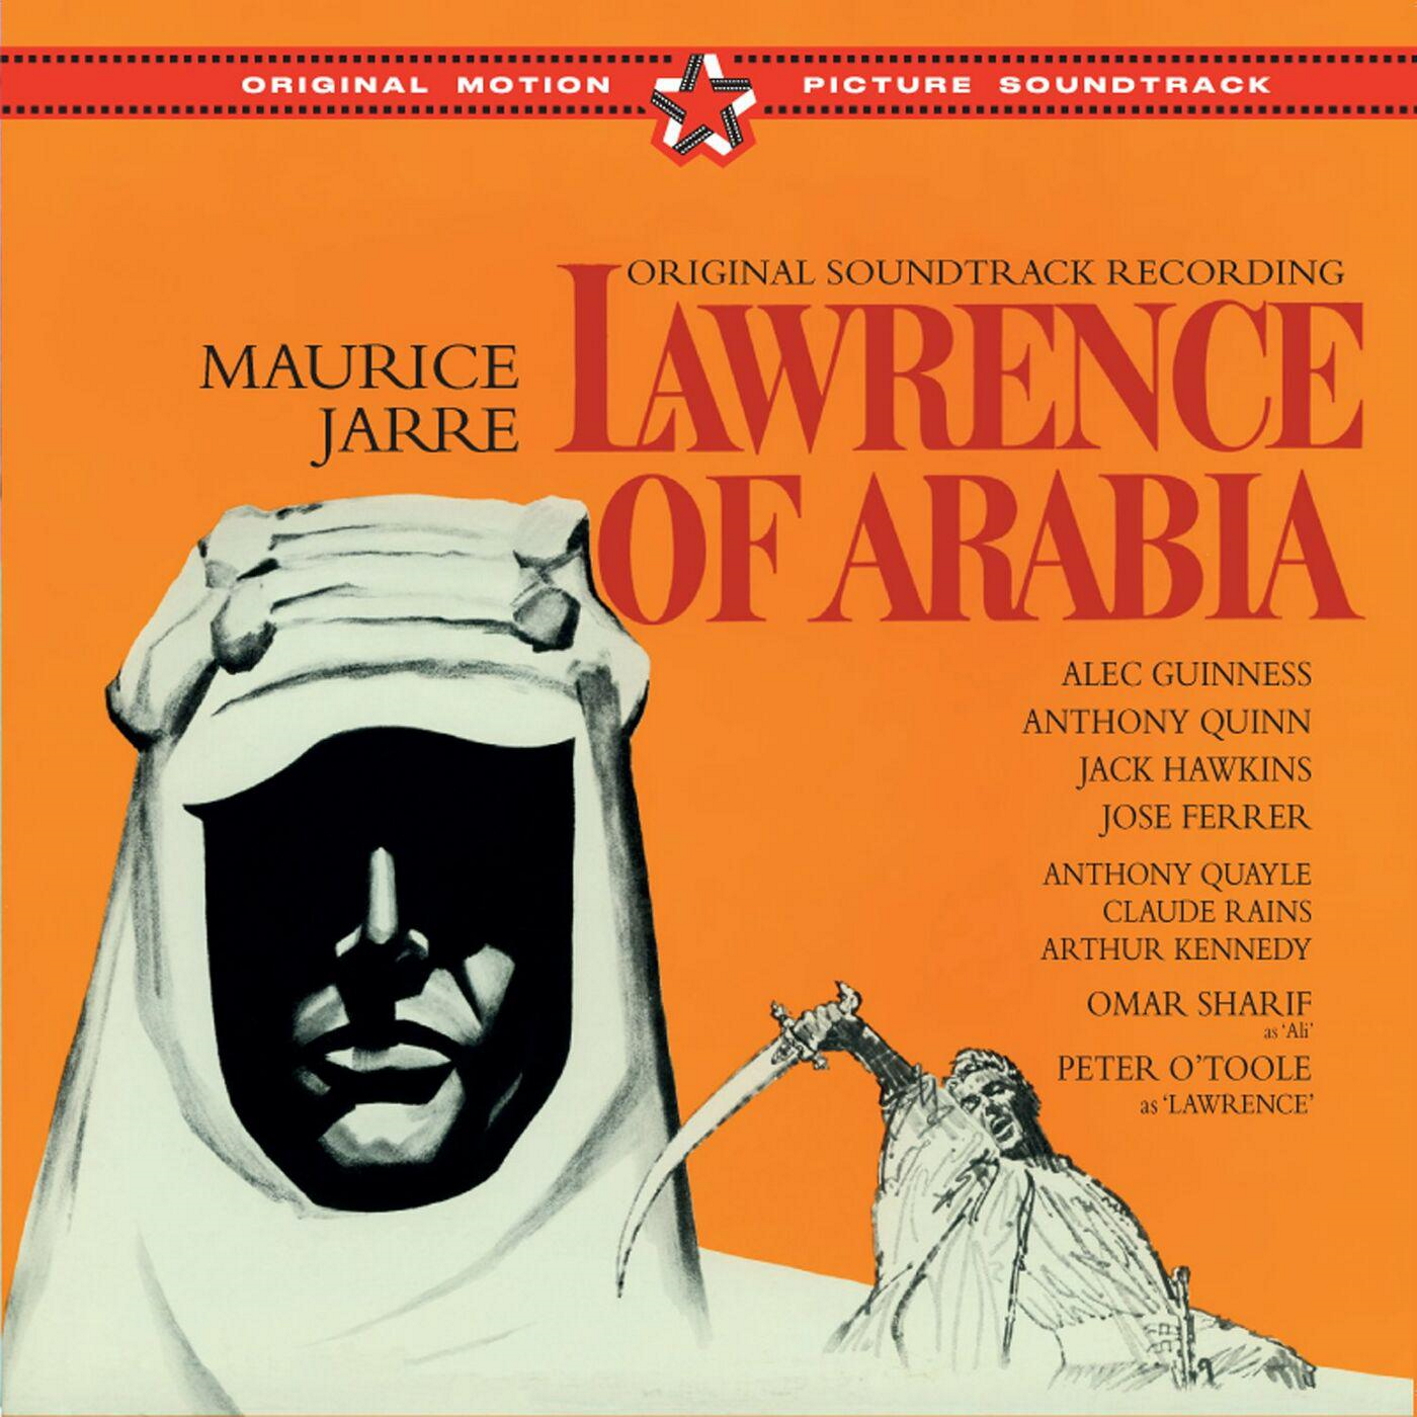 Maurice Jarre - Lawrence of Arabia (Original Soundtrack Recording) (Newly Restored Edition) album cover